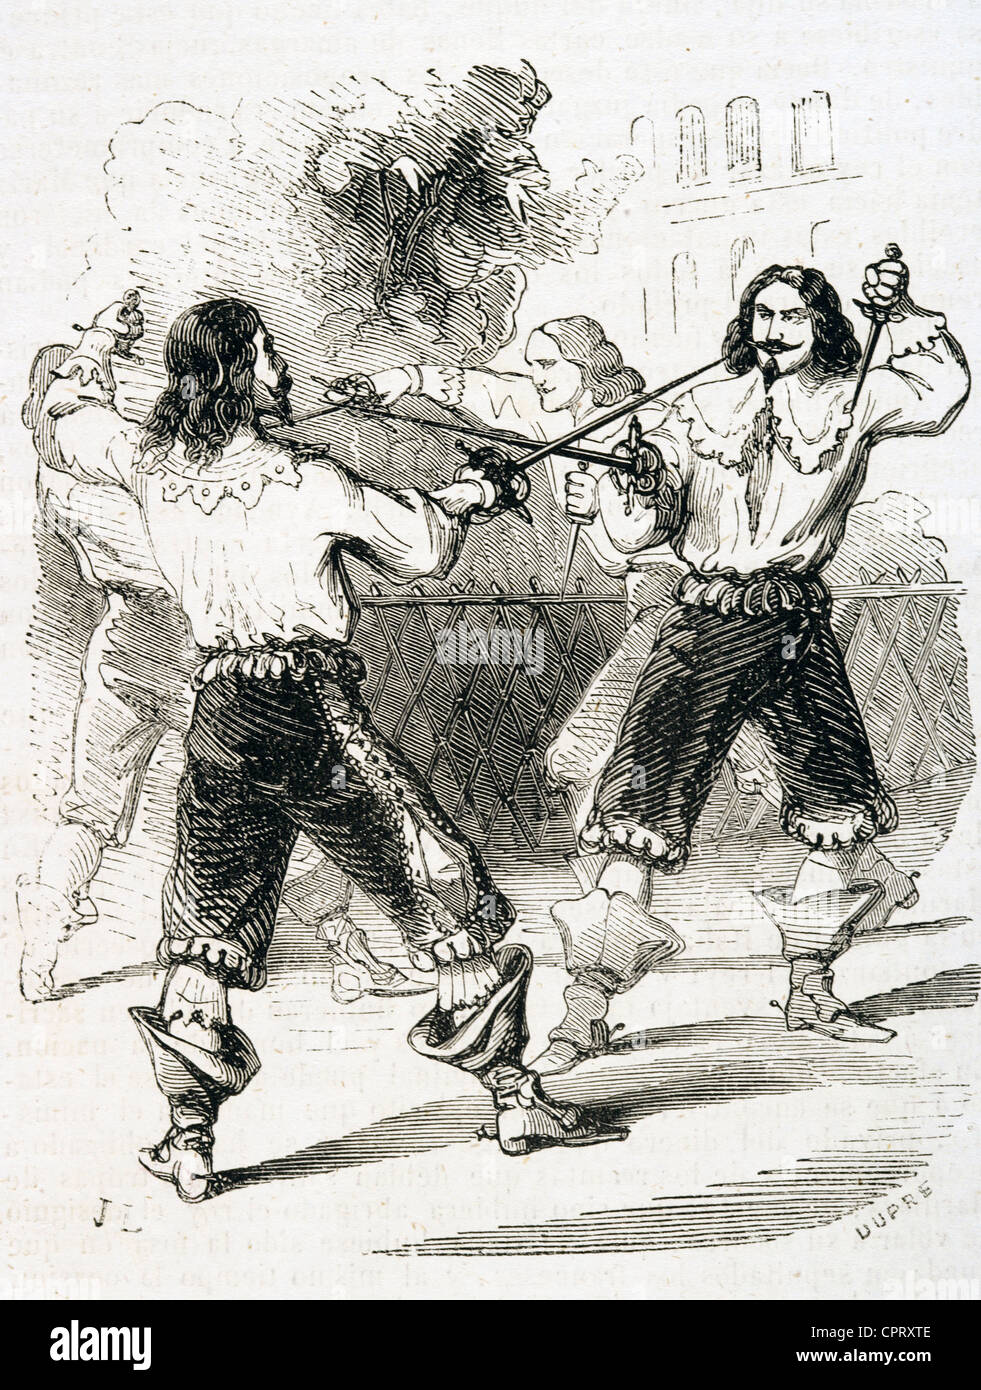 Affair of honor. Duel with swords to repair personal offense. 18th century. Engraving by Dupre. Stock Photo